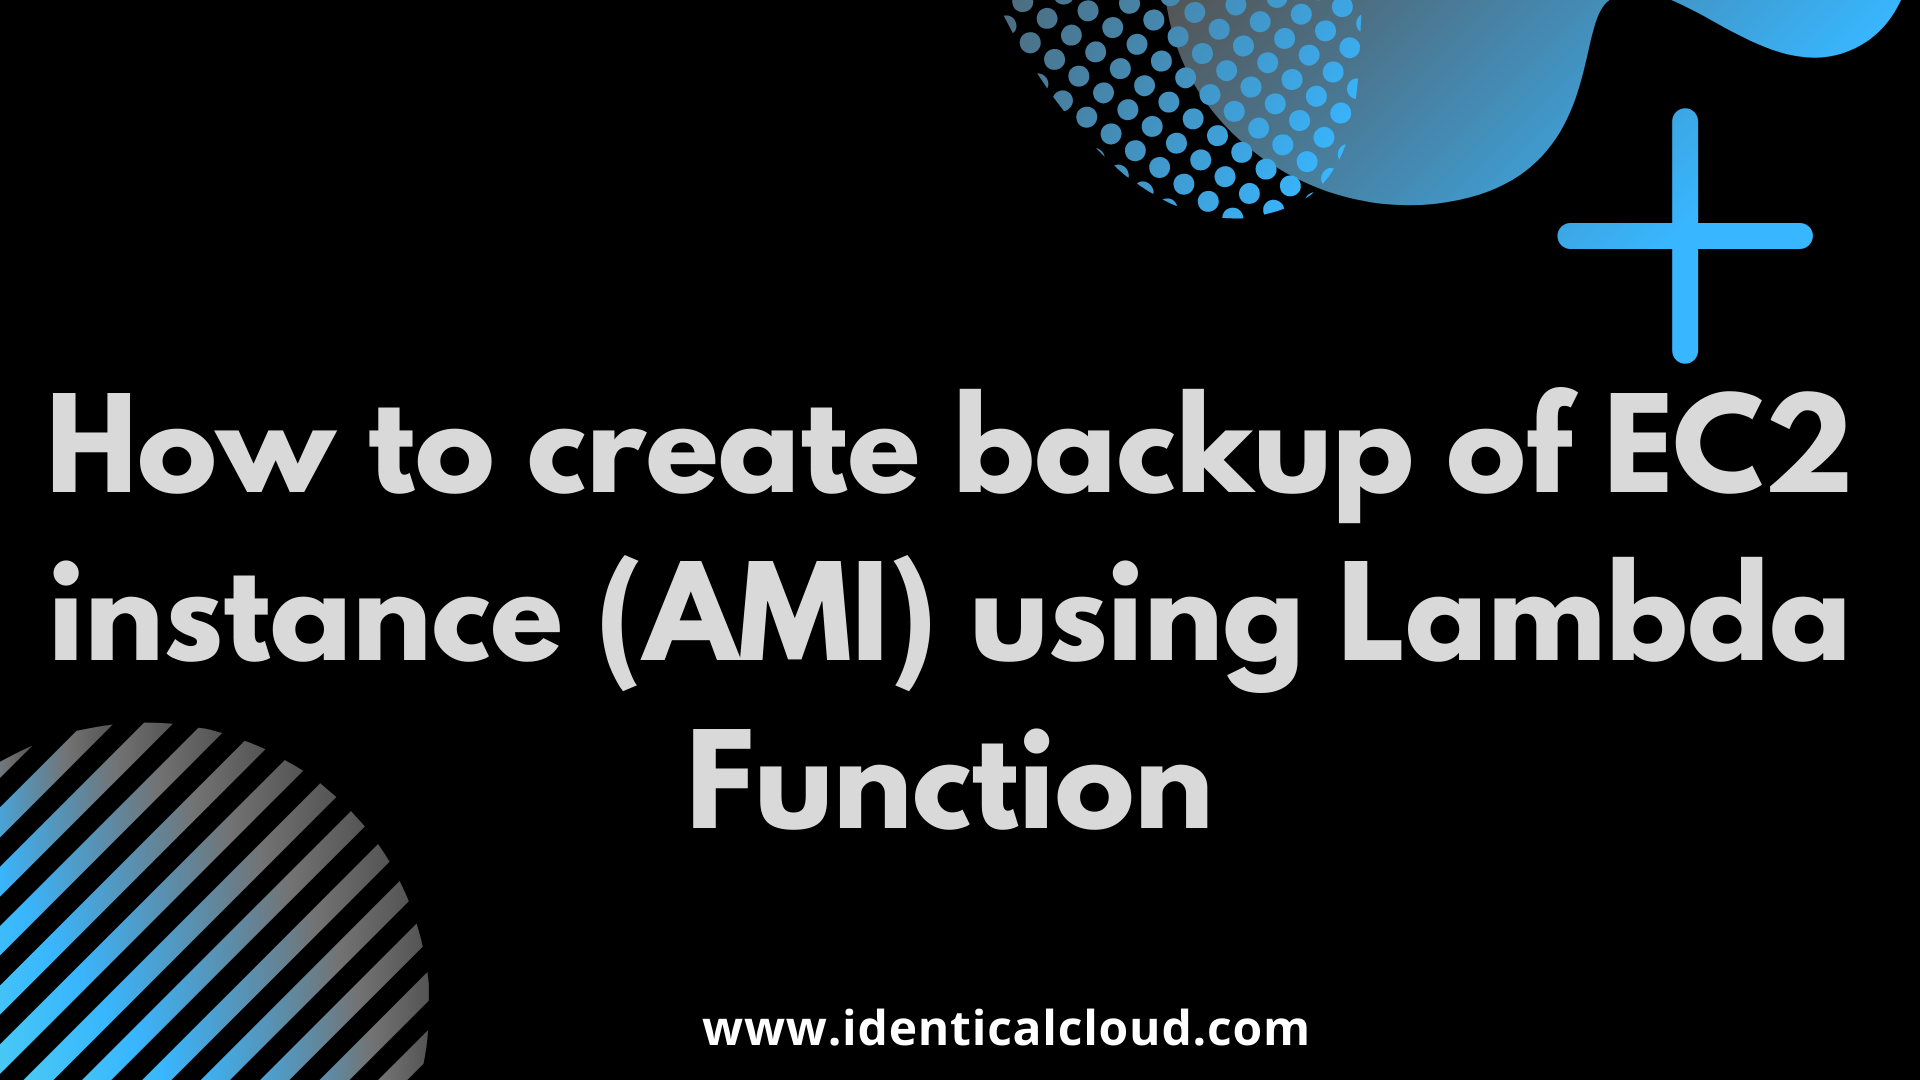 How to create backup of ec2 instances using AWS lambda function